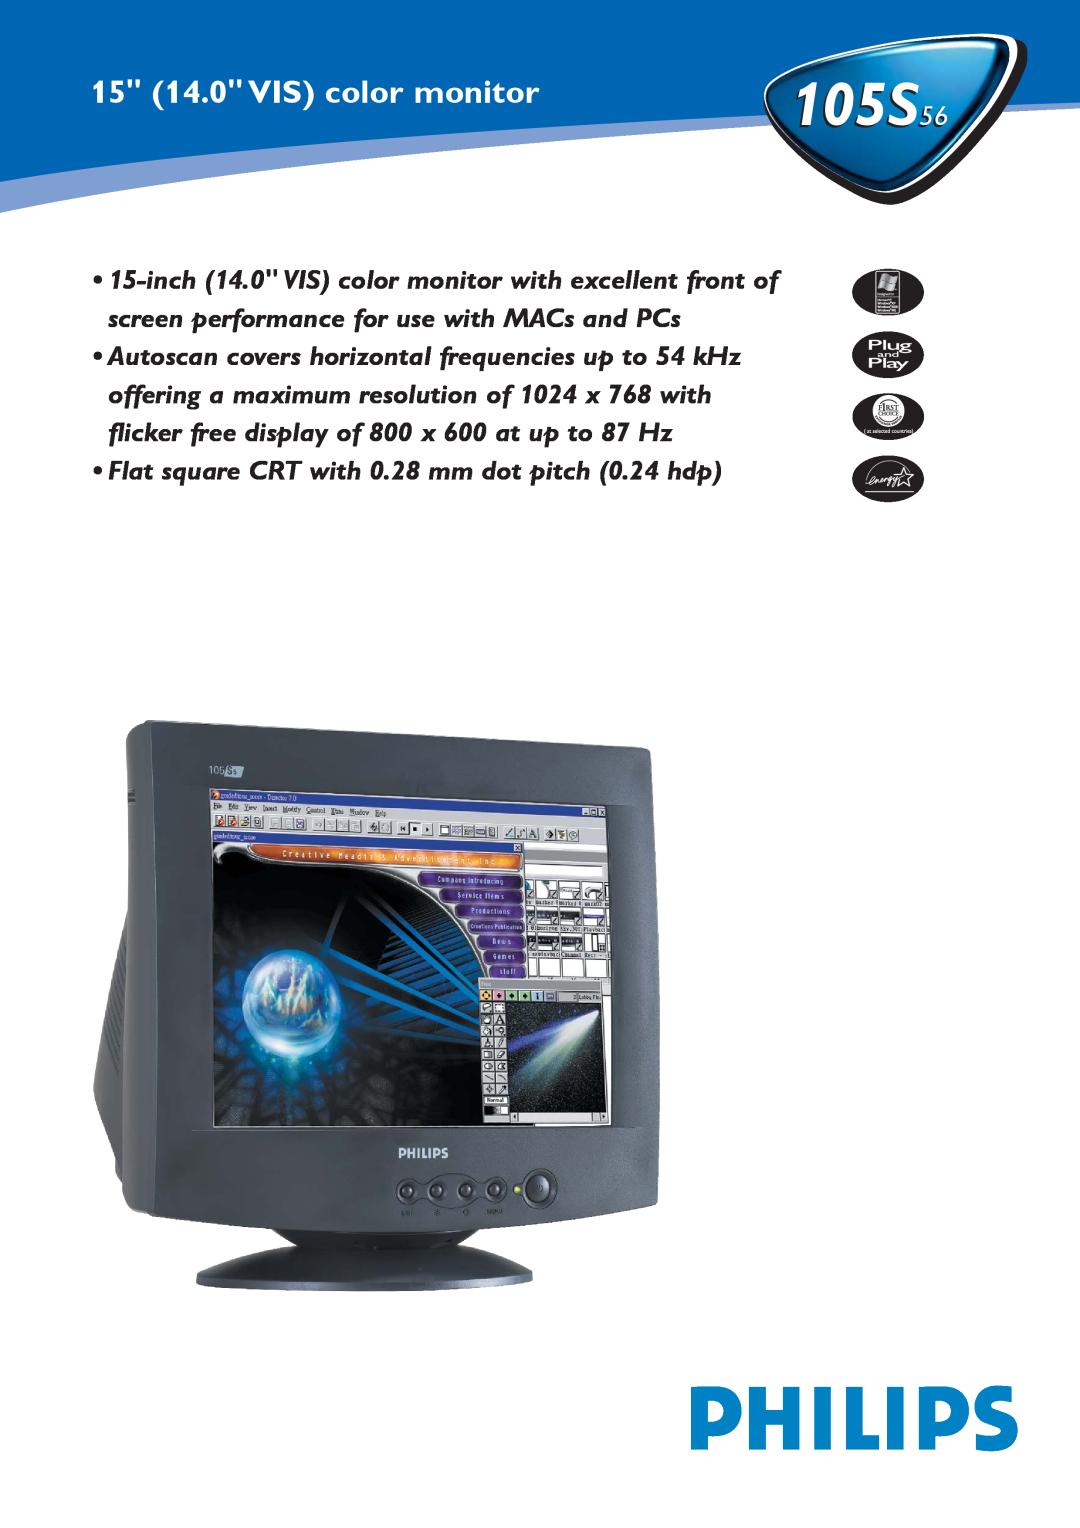 Philips 105S56 manual 15 14.0 VIS color monitor, Flat square CRT with 0.28 mm dot pitch 0.24 hdp 